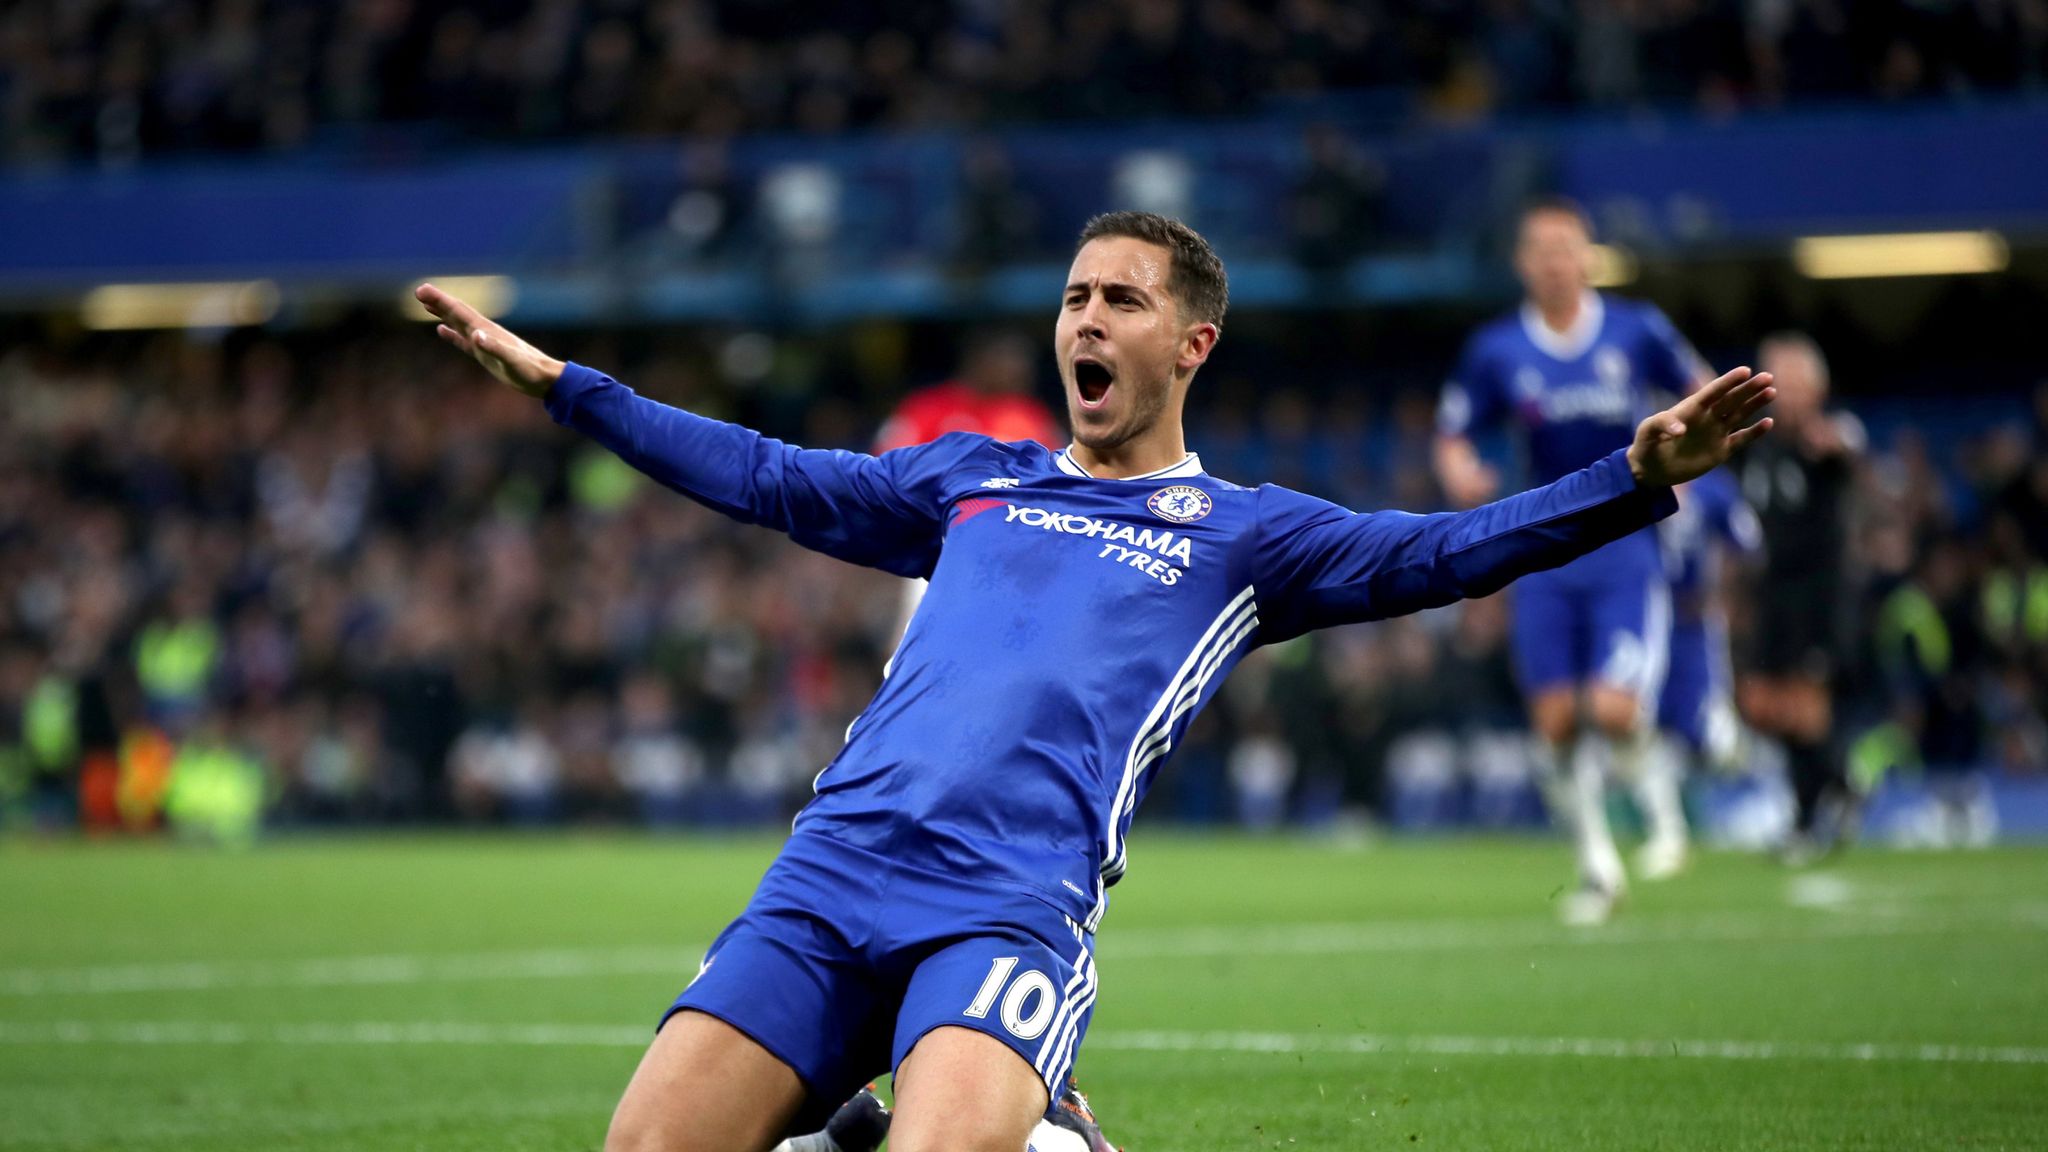 Eden Hazard insists Chelsea have squad depth for Champions League | Football News | Sky Sports